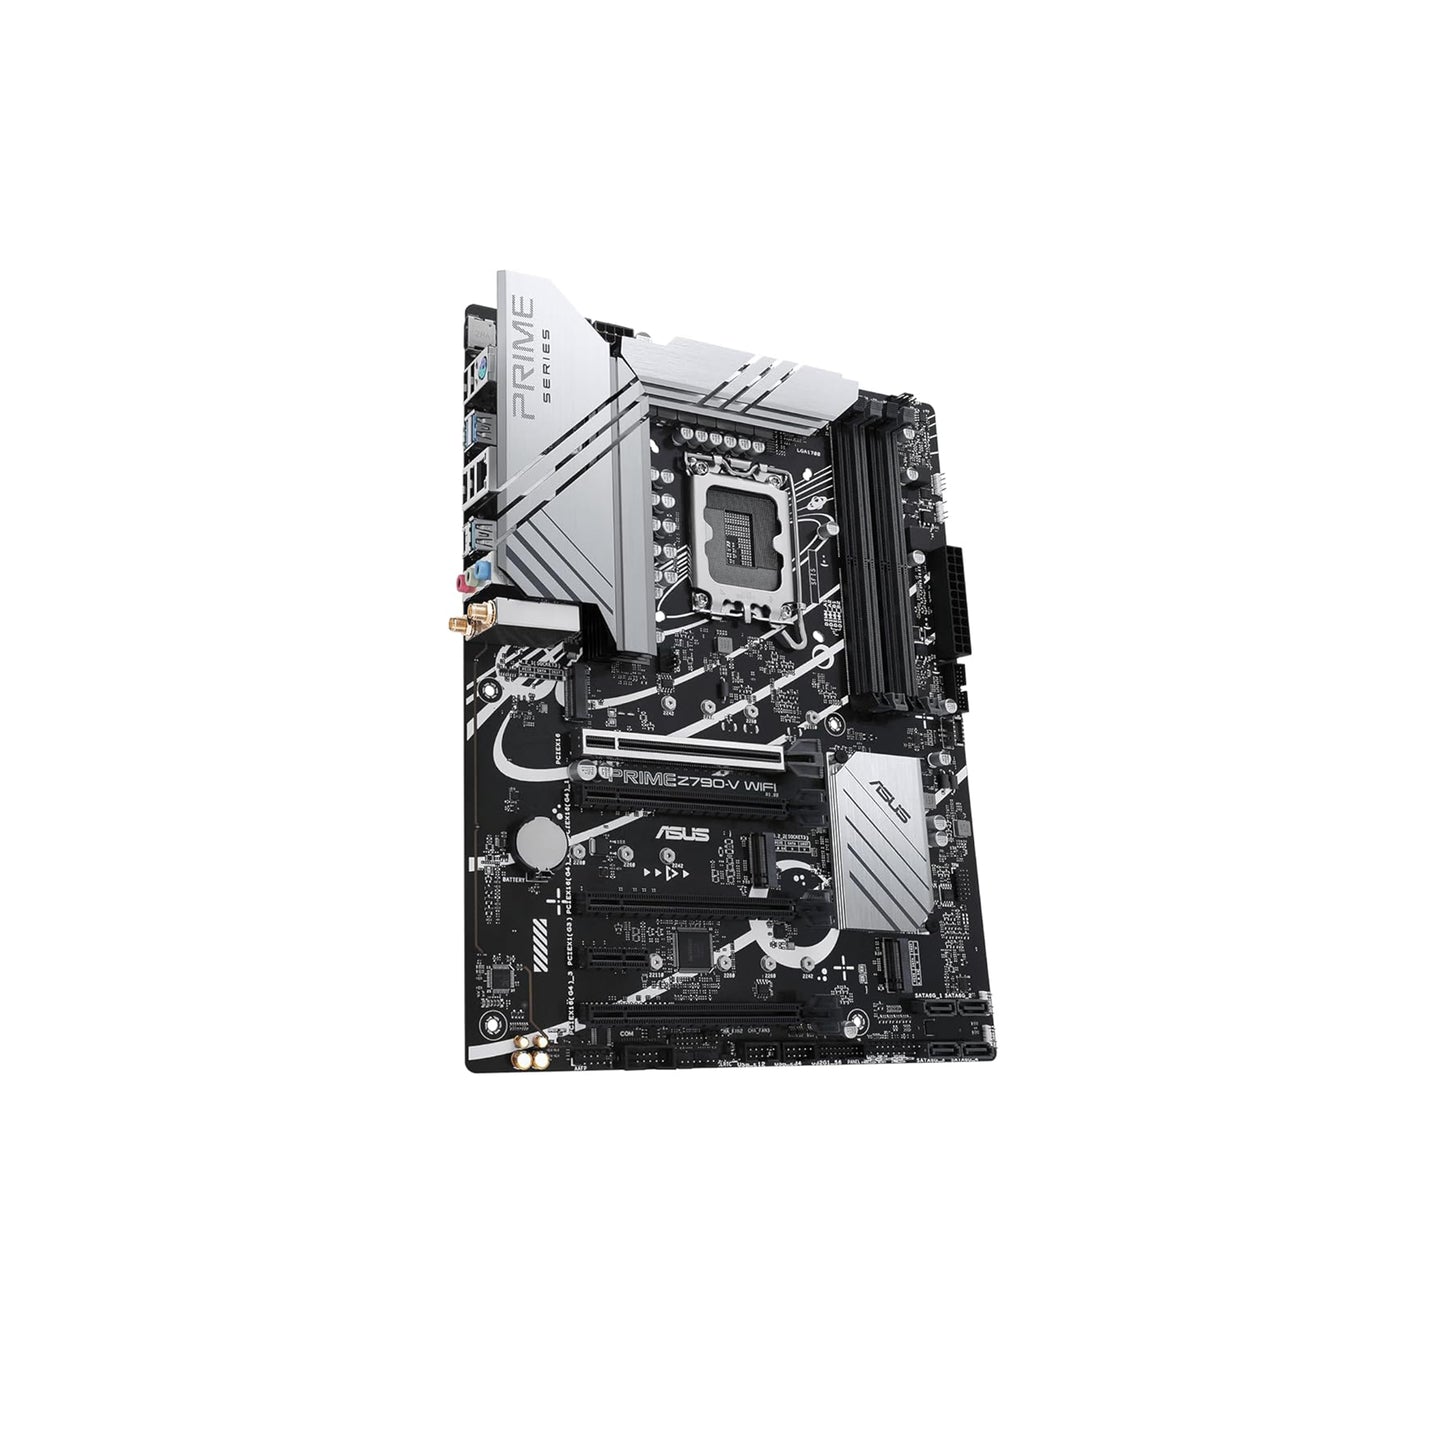 Micro Center Intel Core i5-13600K 14 (6P+8E) Cores up to 5.3 GHz Unlocked LGA 1700 Desktop Processor with Integrated Intel UHD Graphics 770 Bundle with ASUS Prime Z790-V WiFi DDR5 ATX Motherboard